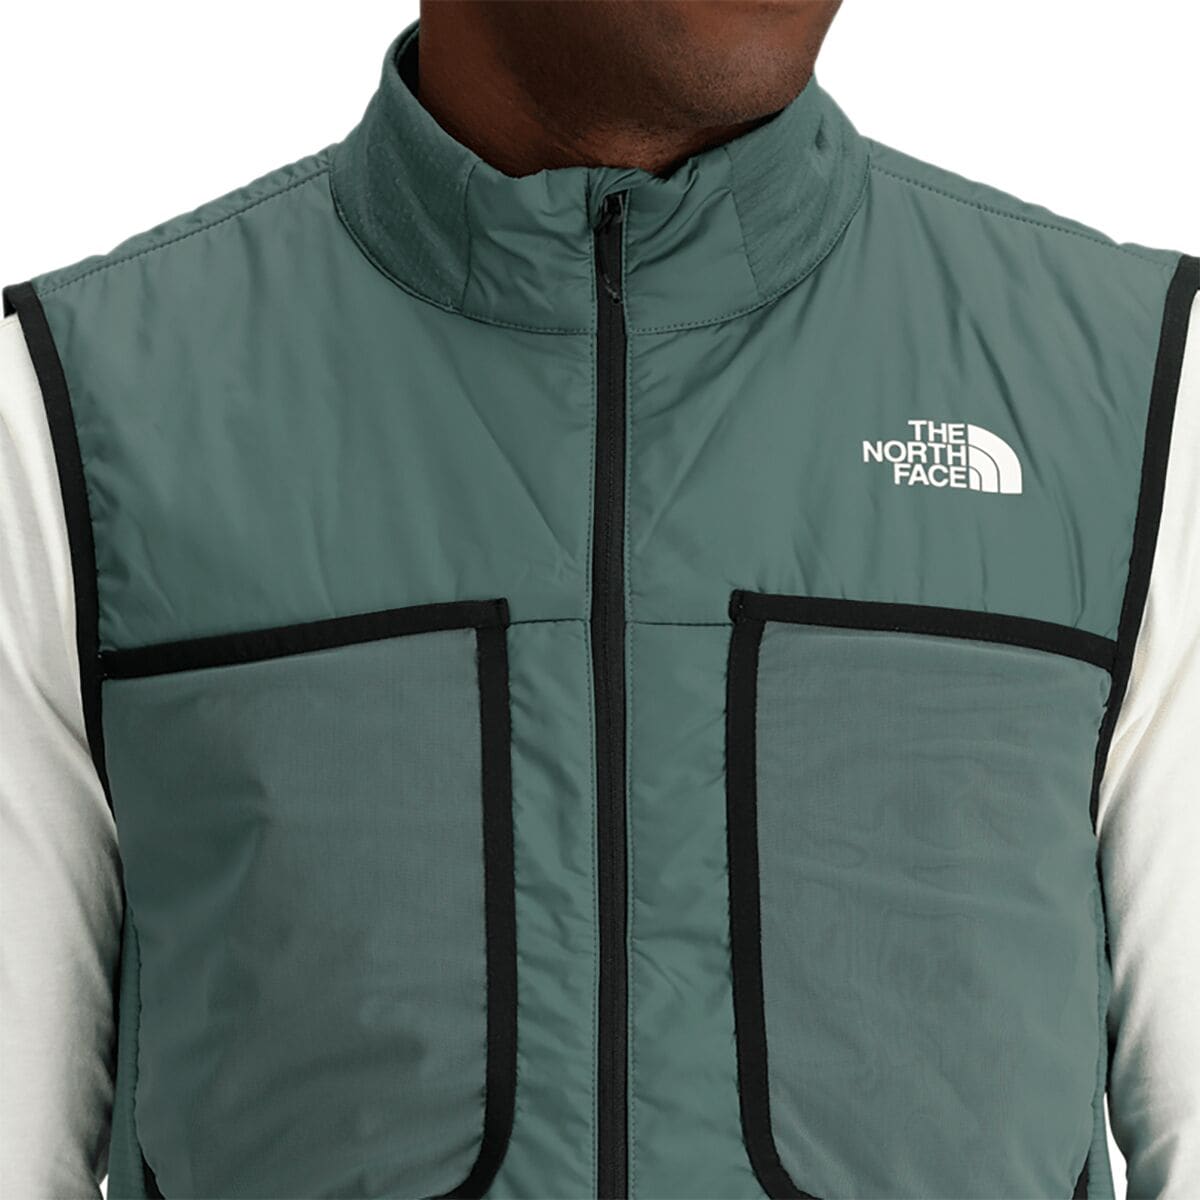 THE NORTH FACE Winter Warm Insulated Vest - Men's